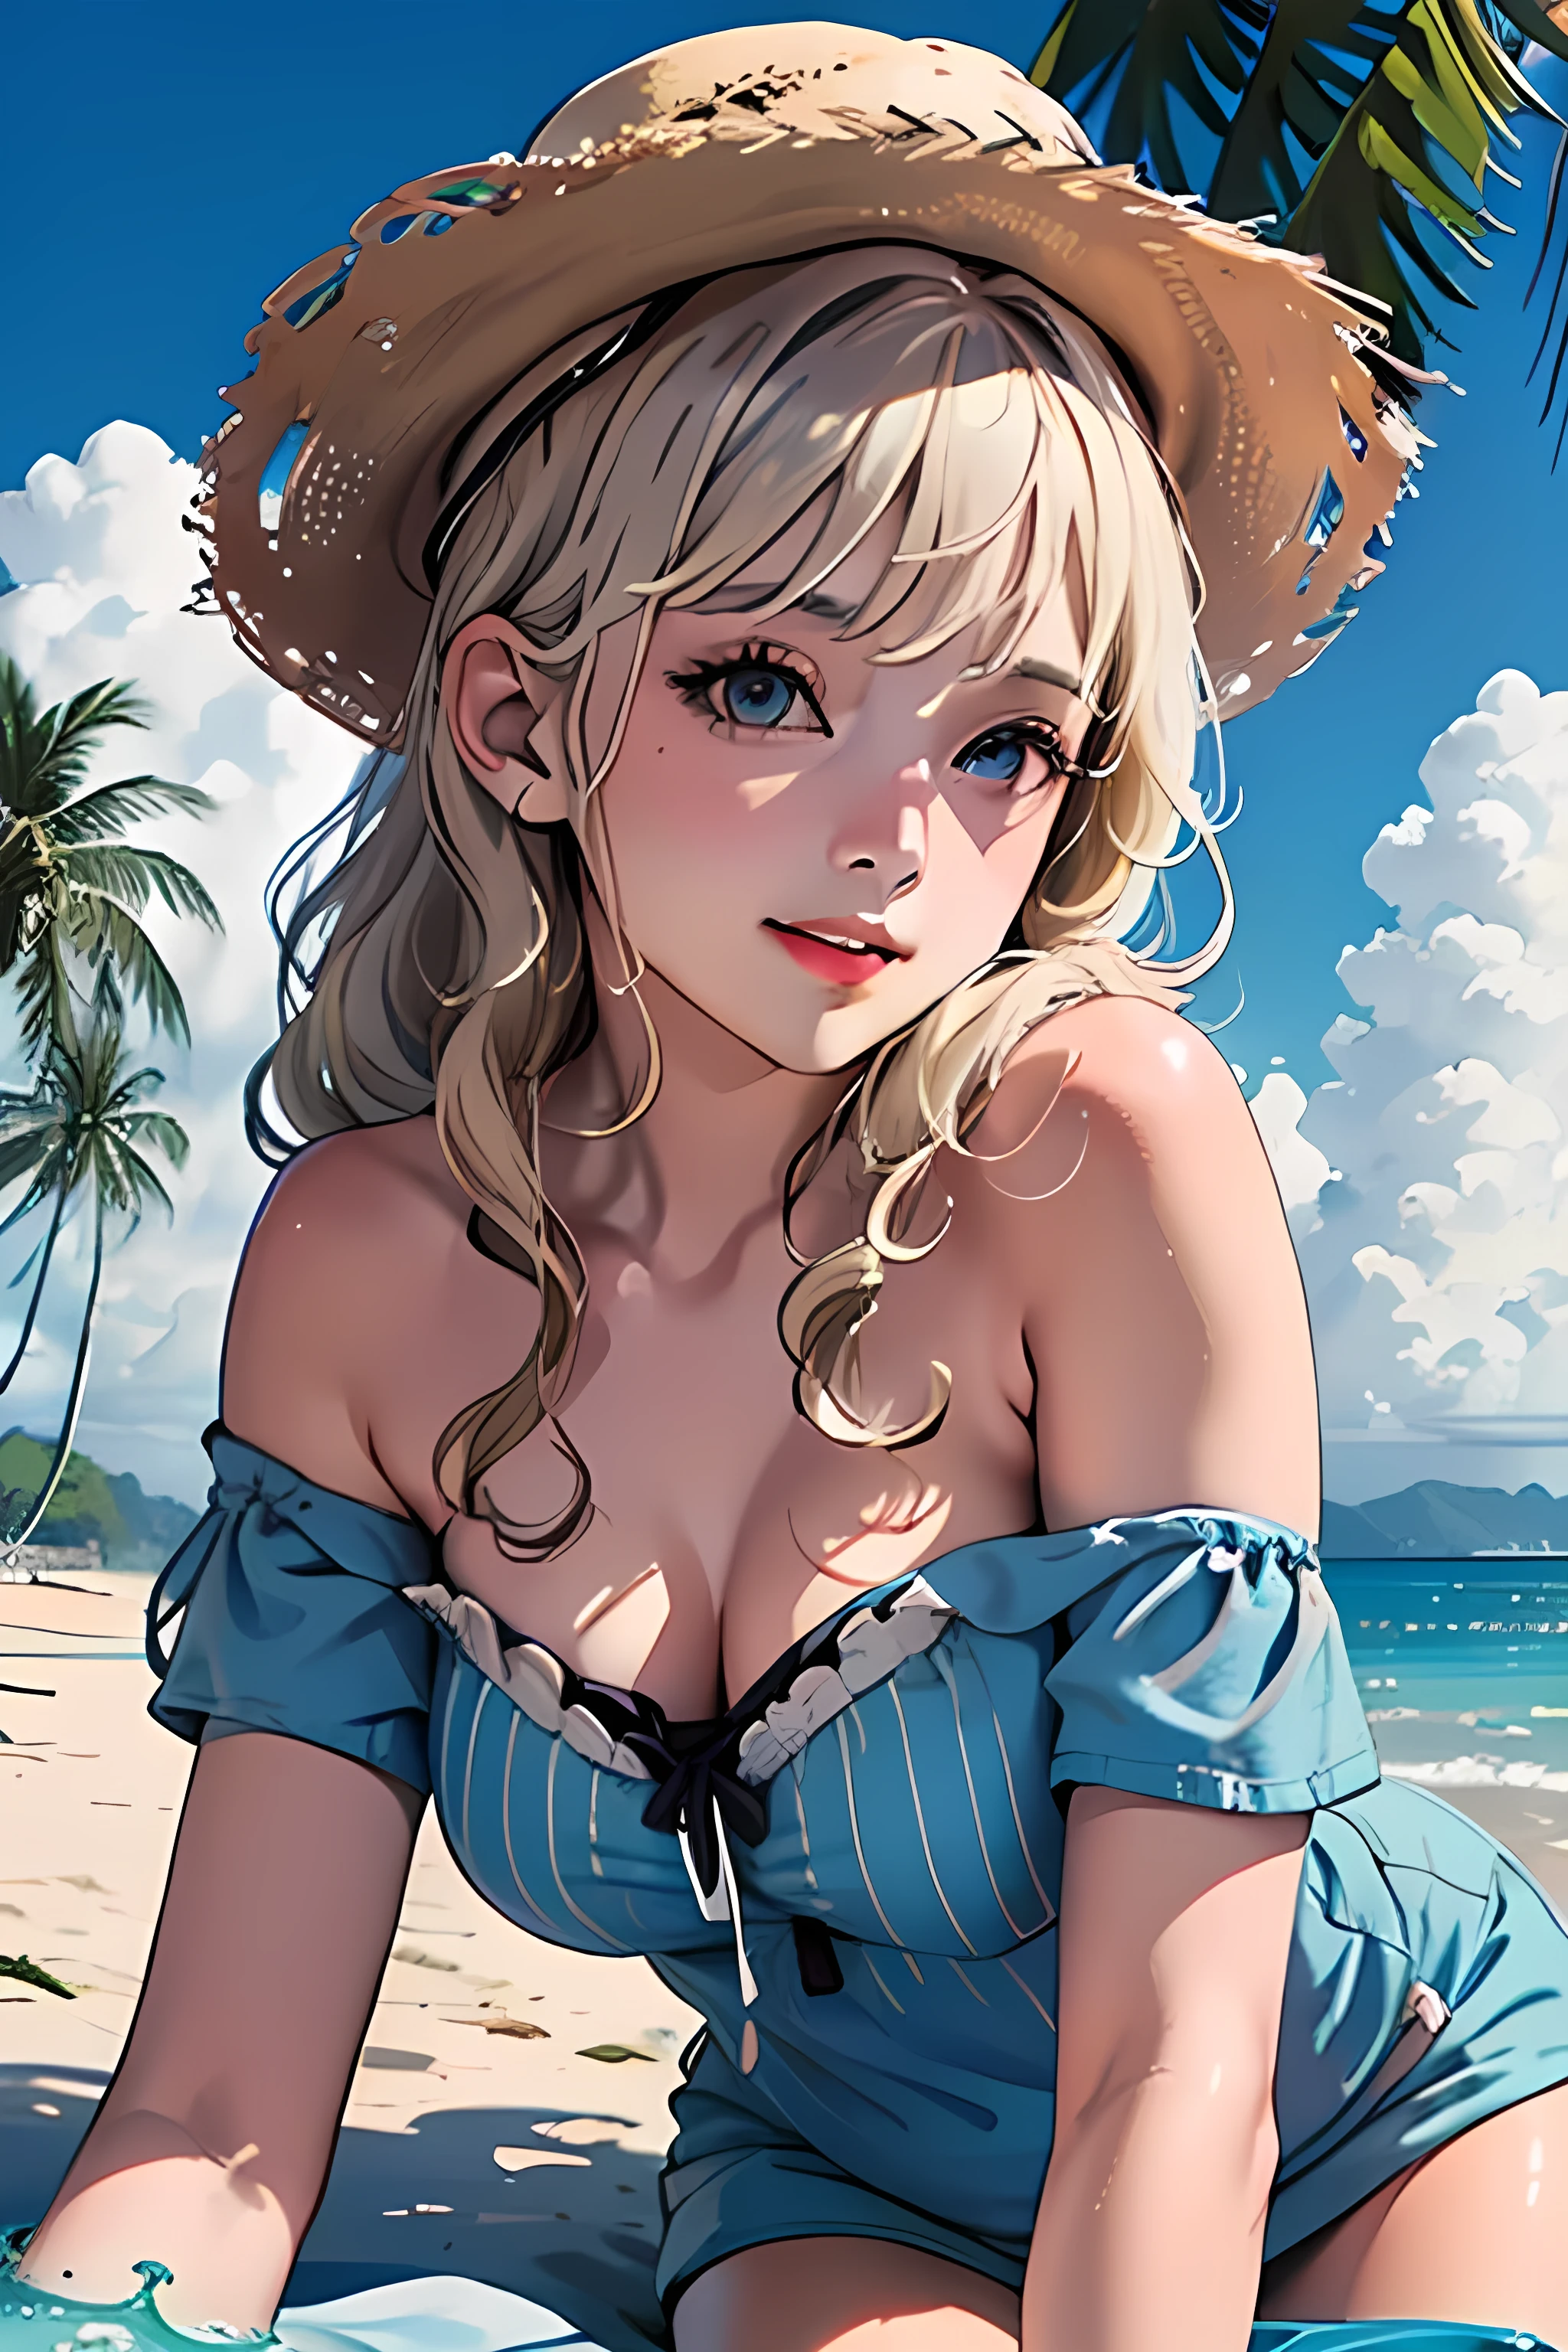 rococo style, (movie poster:1.2), soft lighting, (dramatic angle:1.25), (solo:1.4), (1girl), ((blonde hair), long curly hair), blue eyes, (smile), beach straw hat, (off-shoulder shirt), hat flower, (looking to the side:1.3), fantastic colorful, sea, coconut tree, blue sky with clouds, (beach:1.3), (masterpiece:1.2), ultra-detailed, (best quality), illustration, (Depth of field)